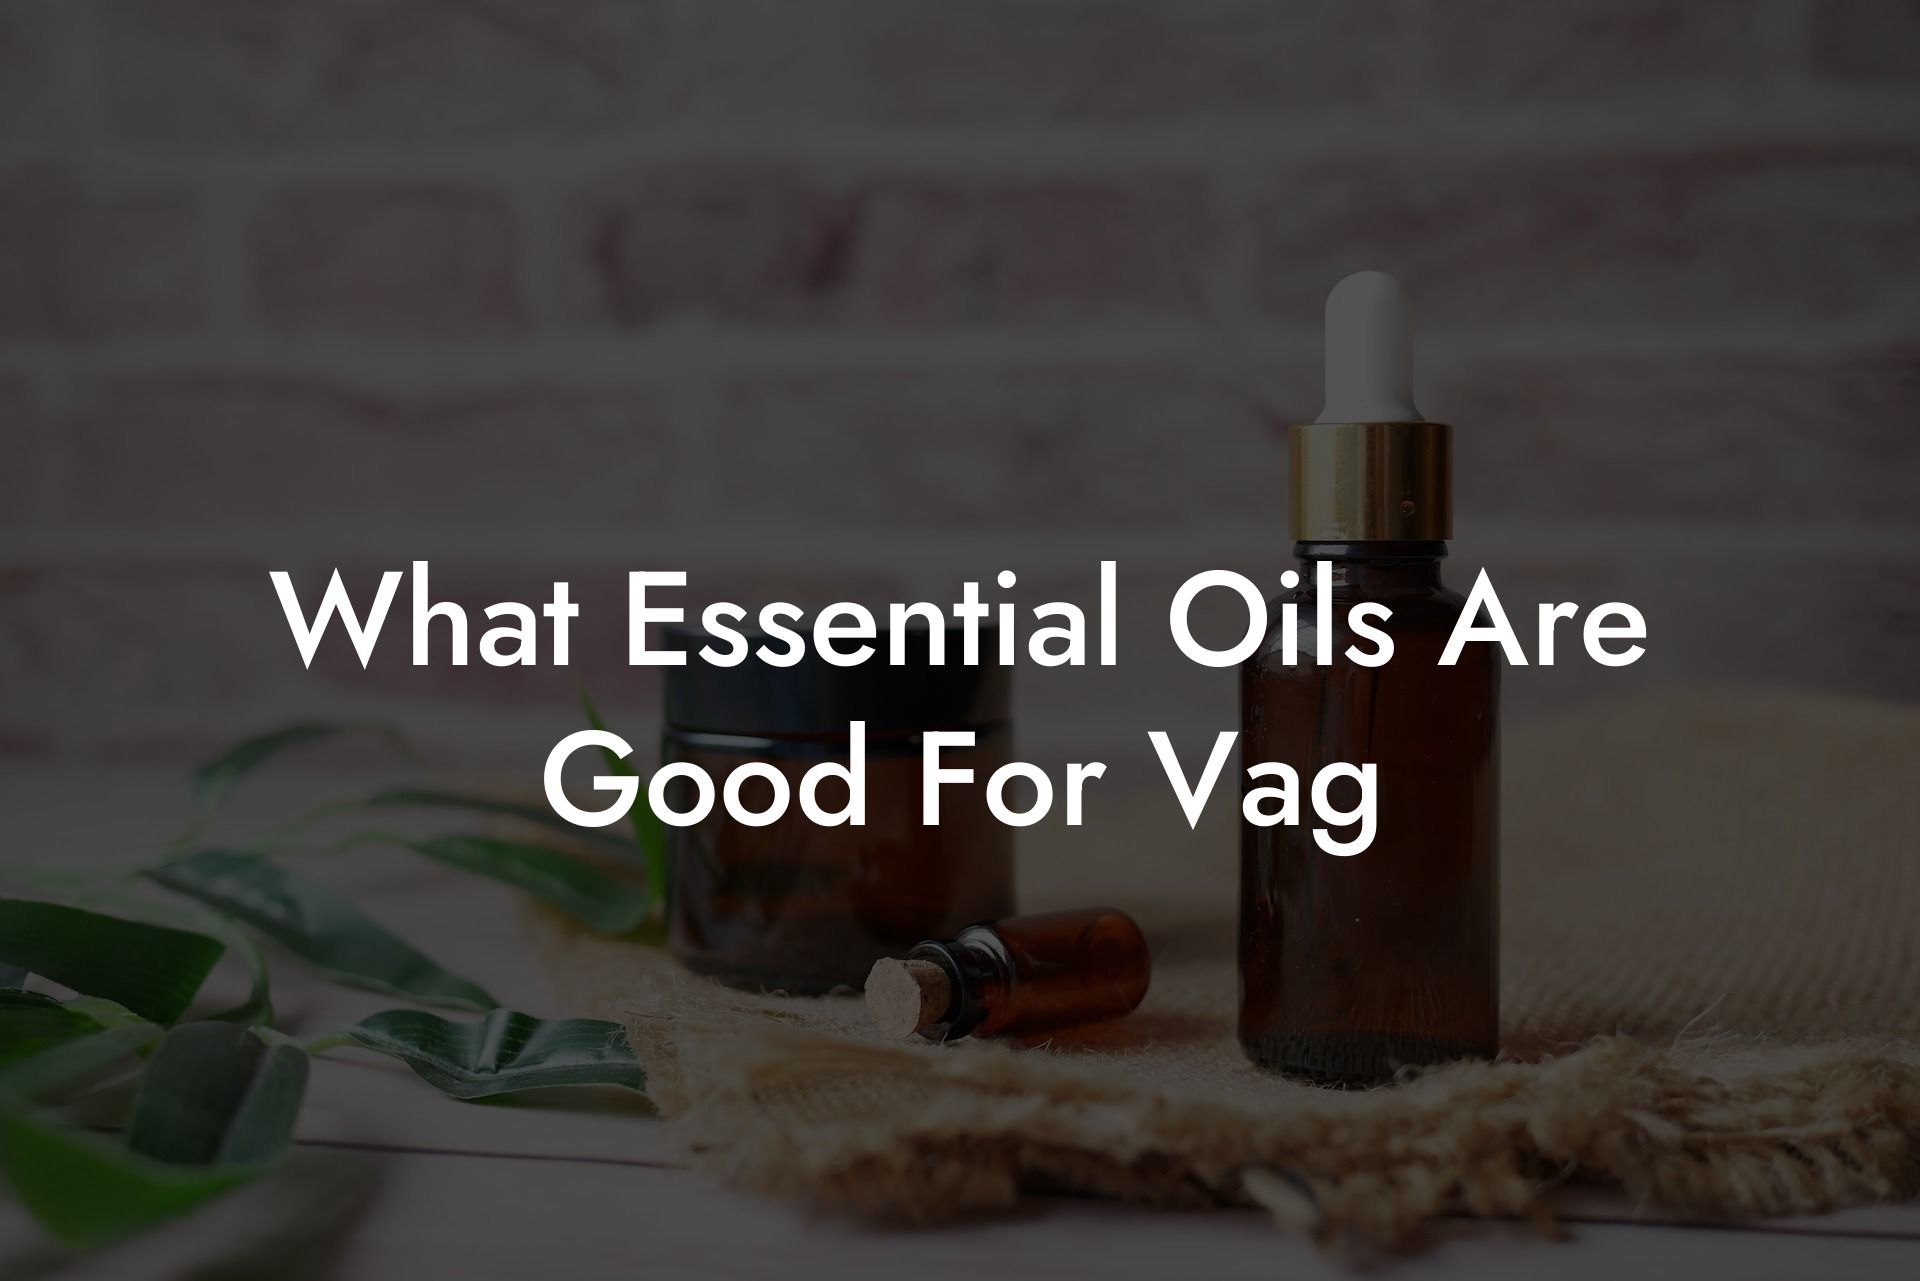 What Essential Oils Are Good For Vag